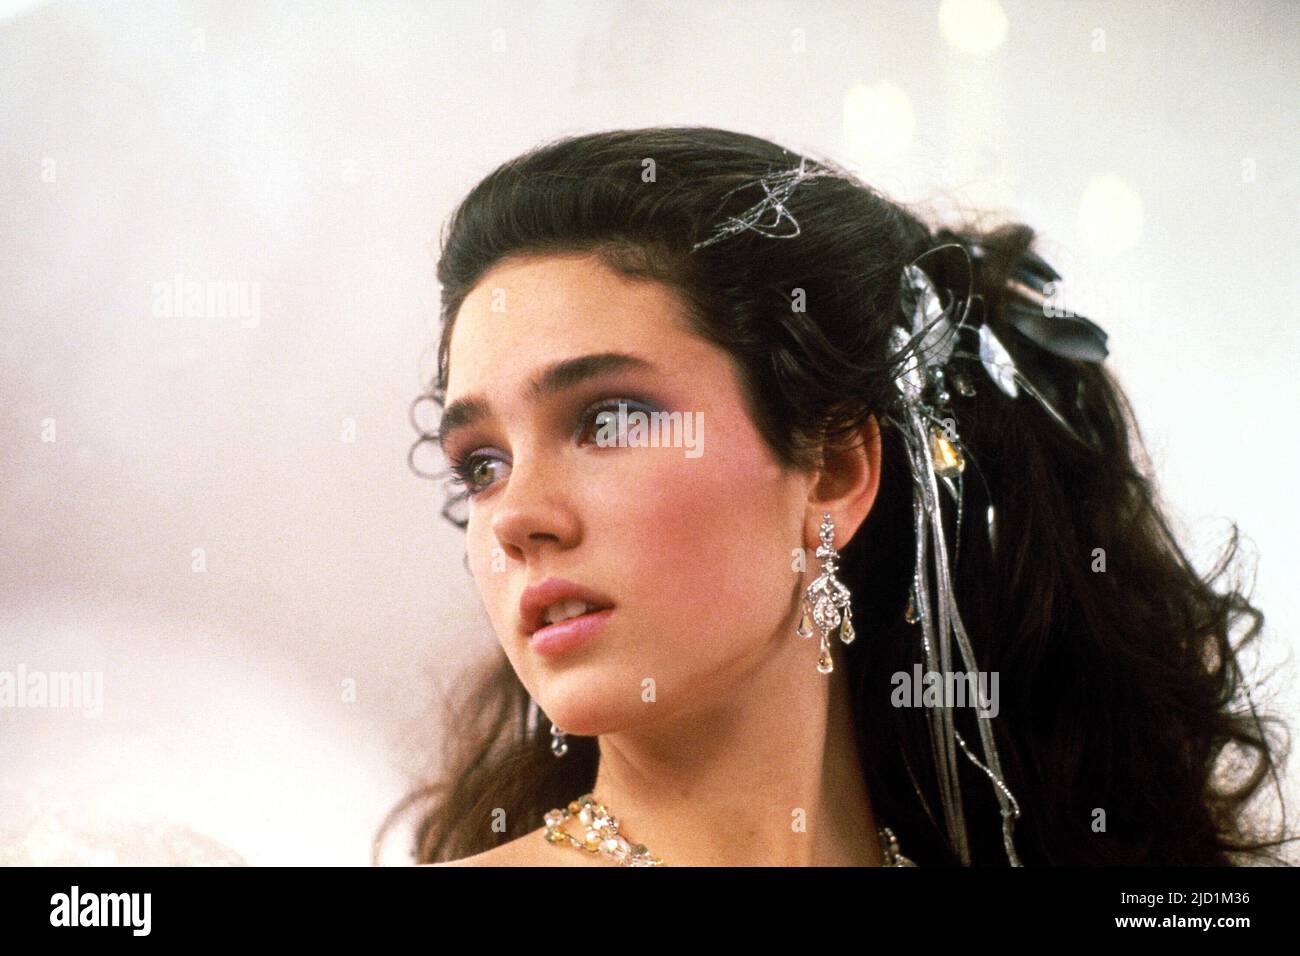 JENNIFER CONNELLY in LABYRINTH (1986), directed by JIM HENSON. Credit:  TRISTAR PICTURES / Album Stock Photo - Alamy